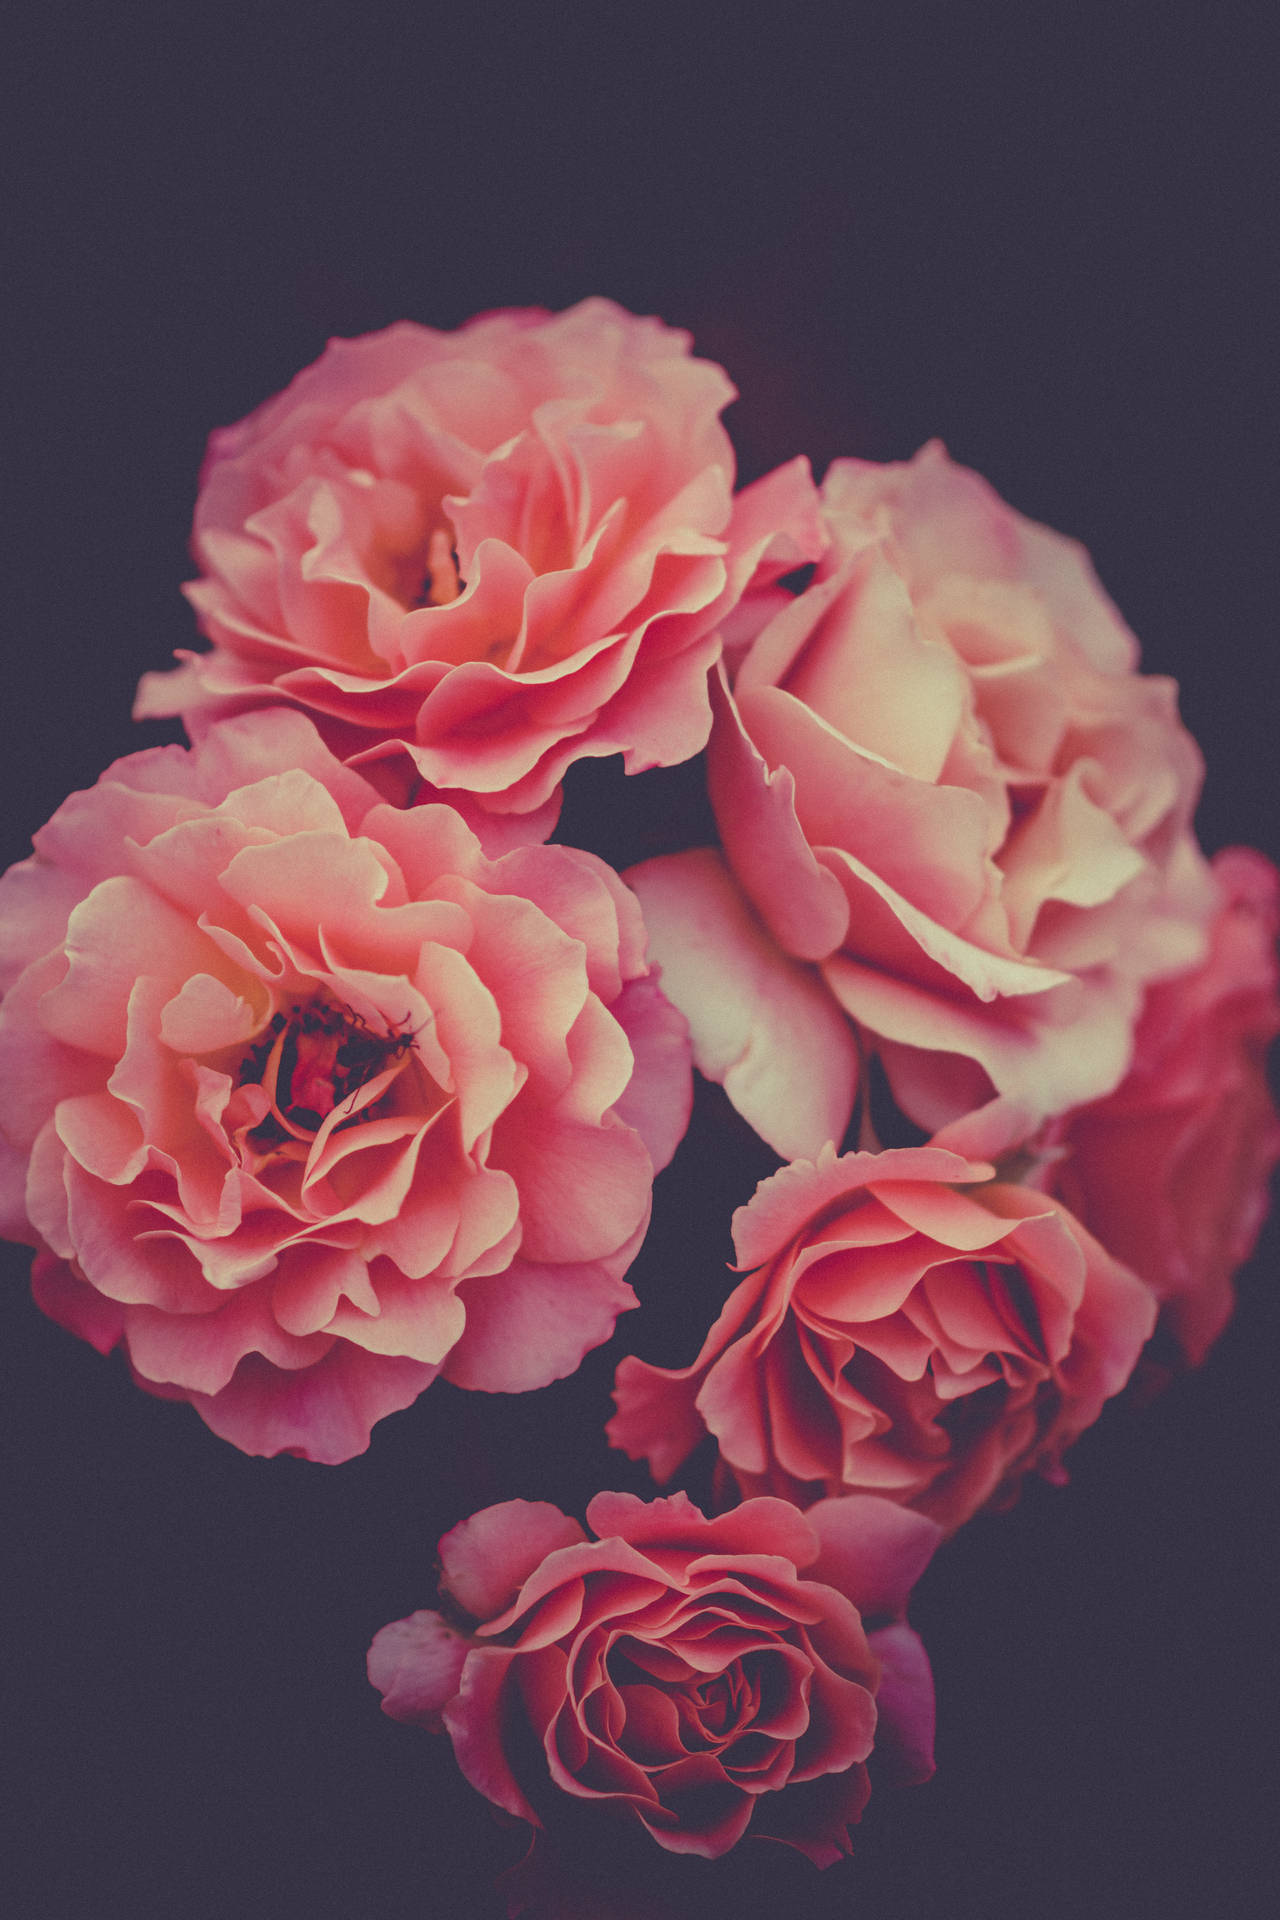 Floral Bloom Aesthetic Art Background